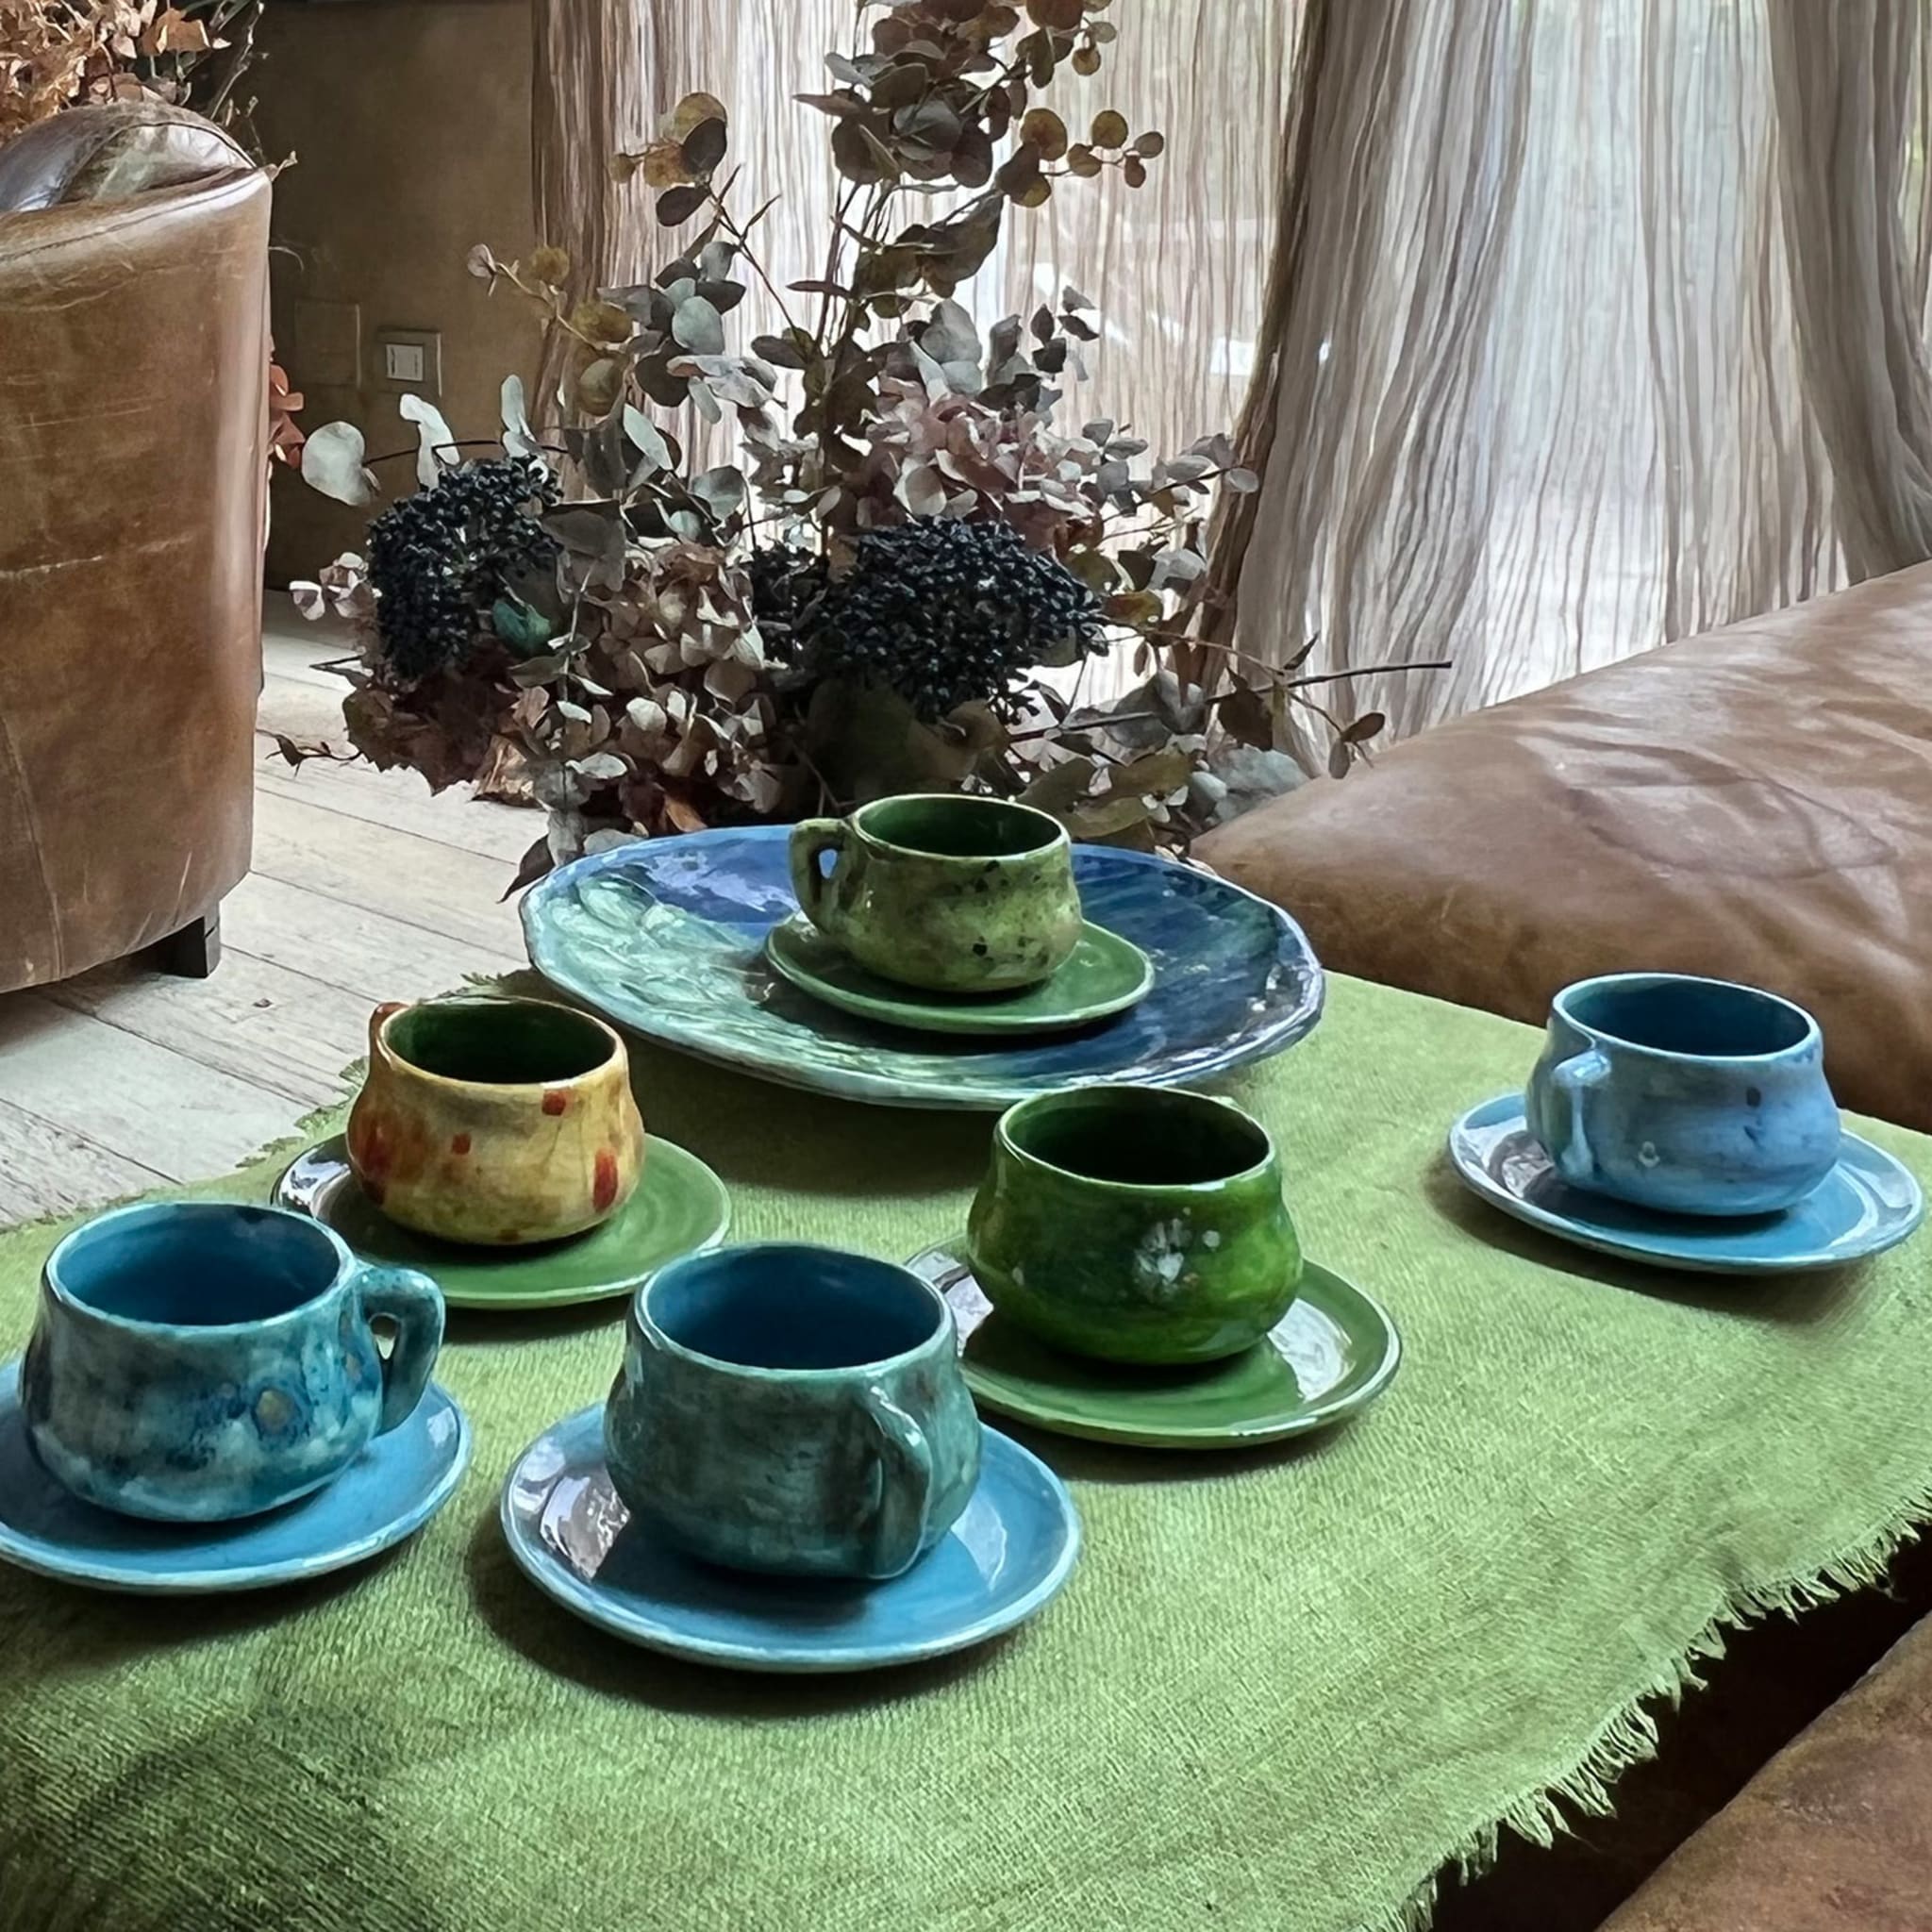 Jade Teal & Blue Espresso Cup with Saucer - Alternative view 1